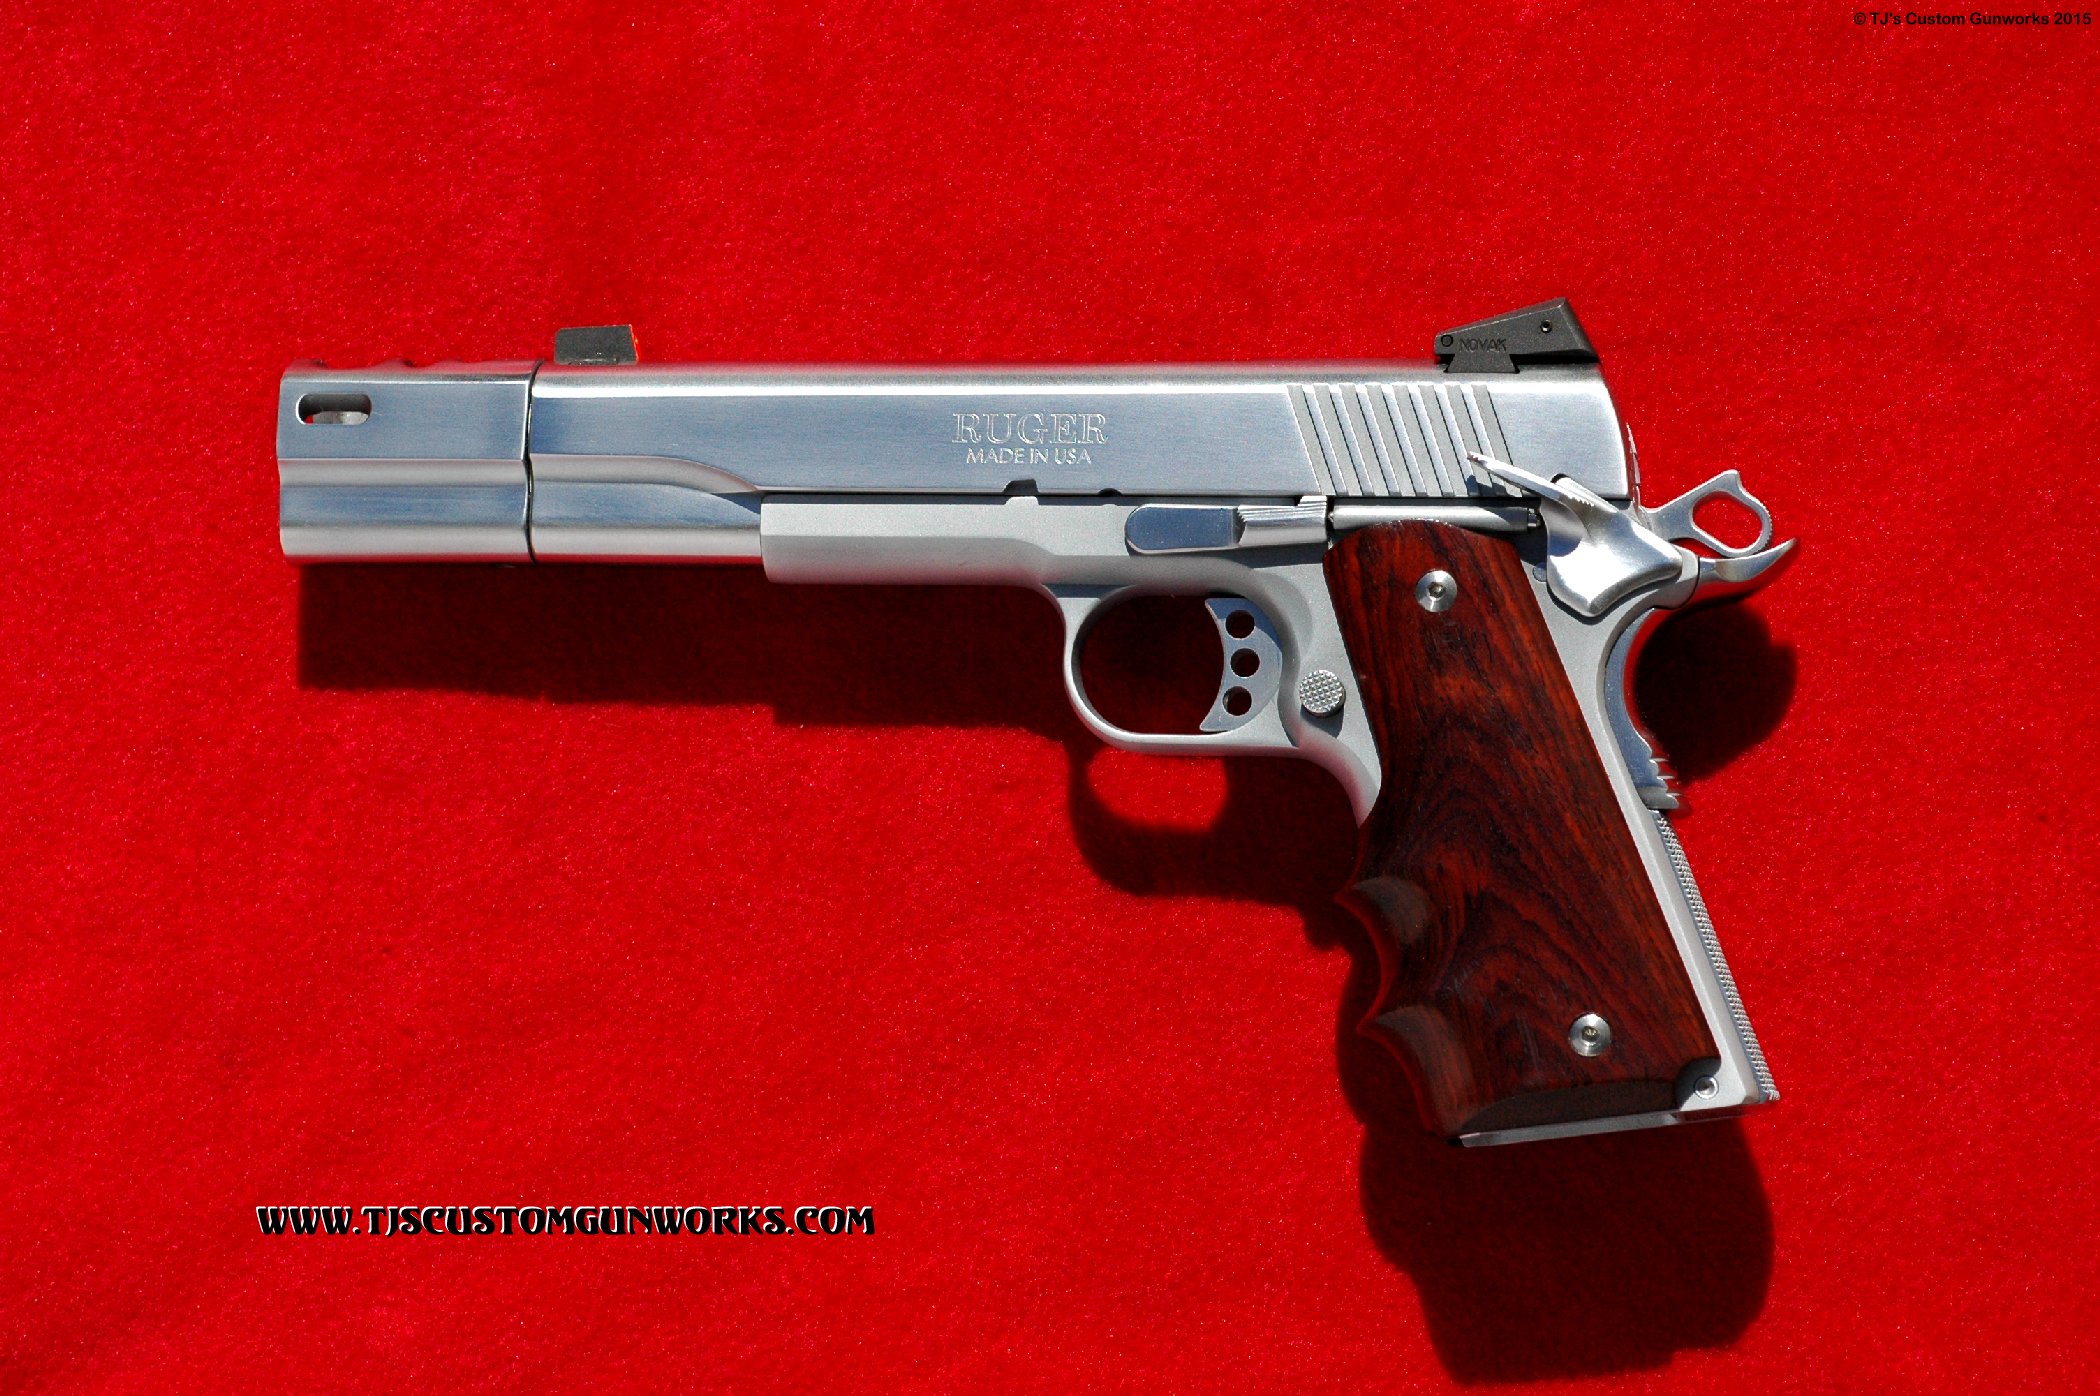 Custom Compensated Stainless Ruger 1911.